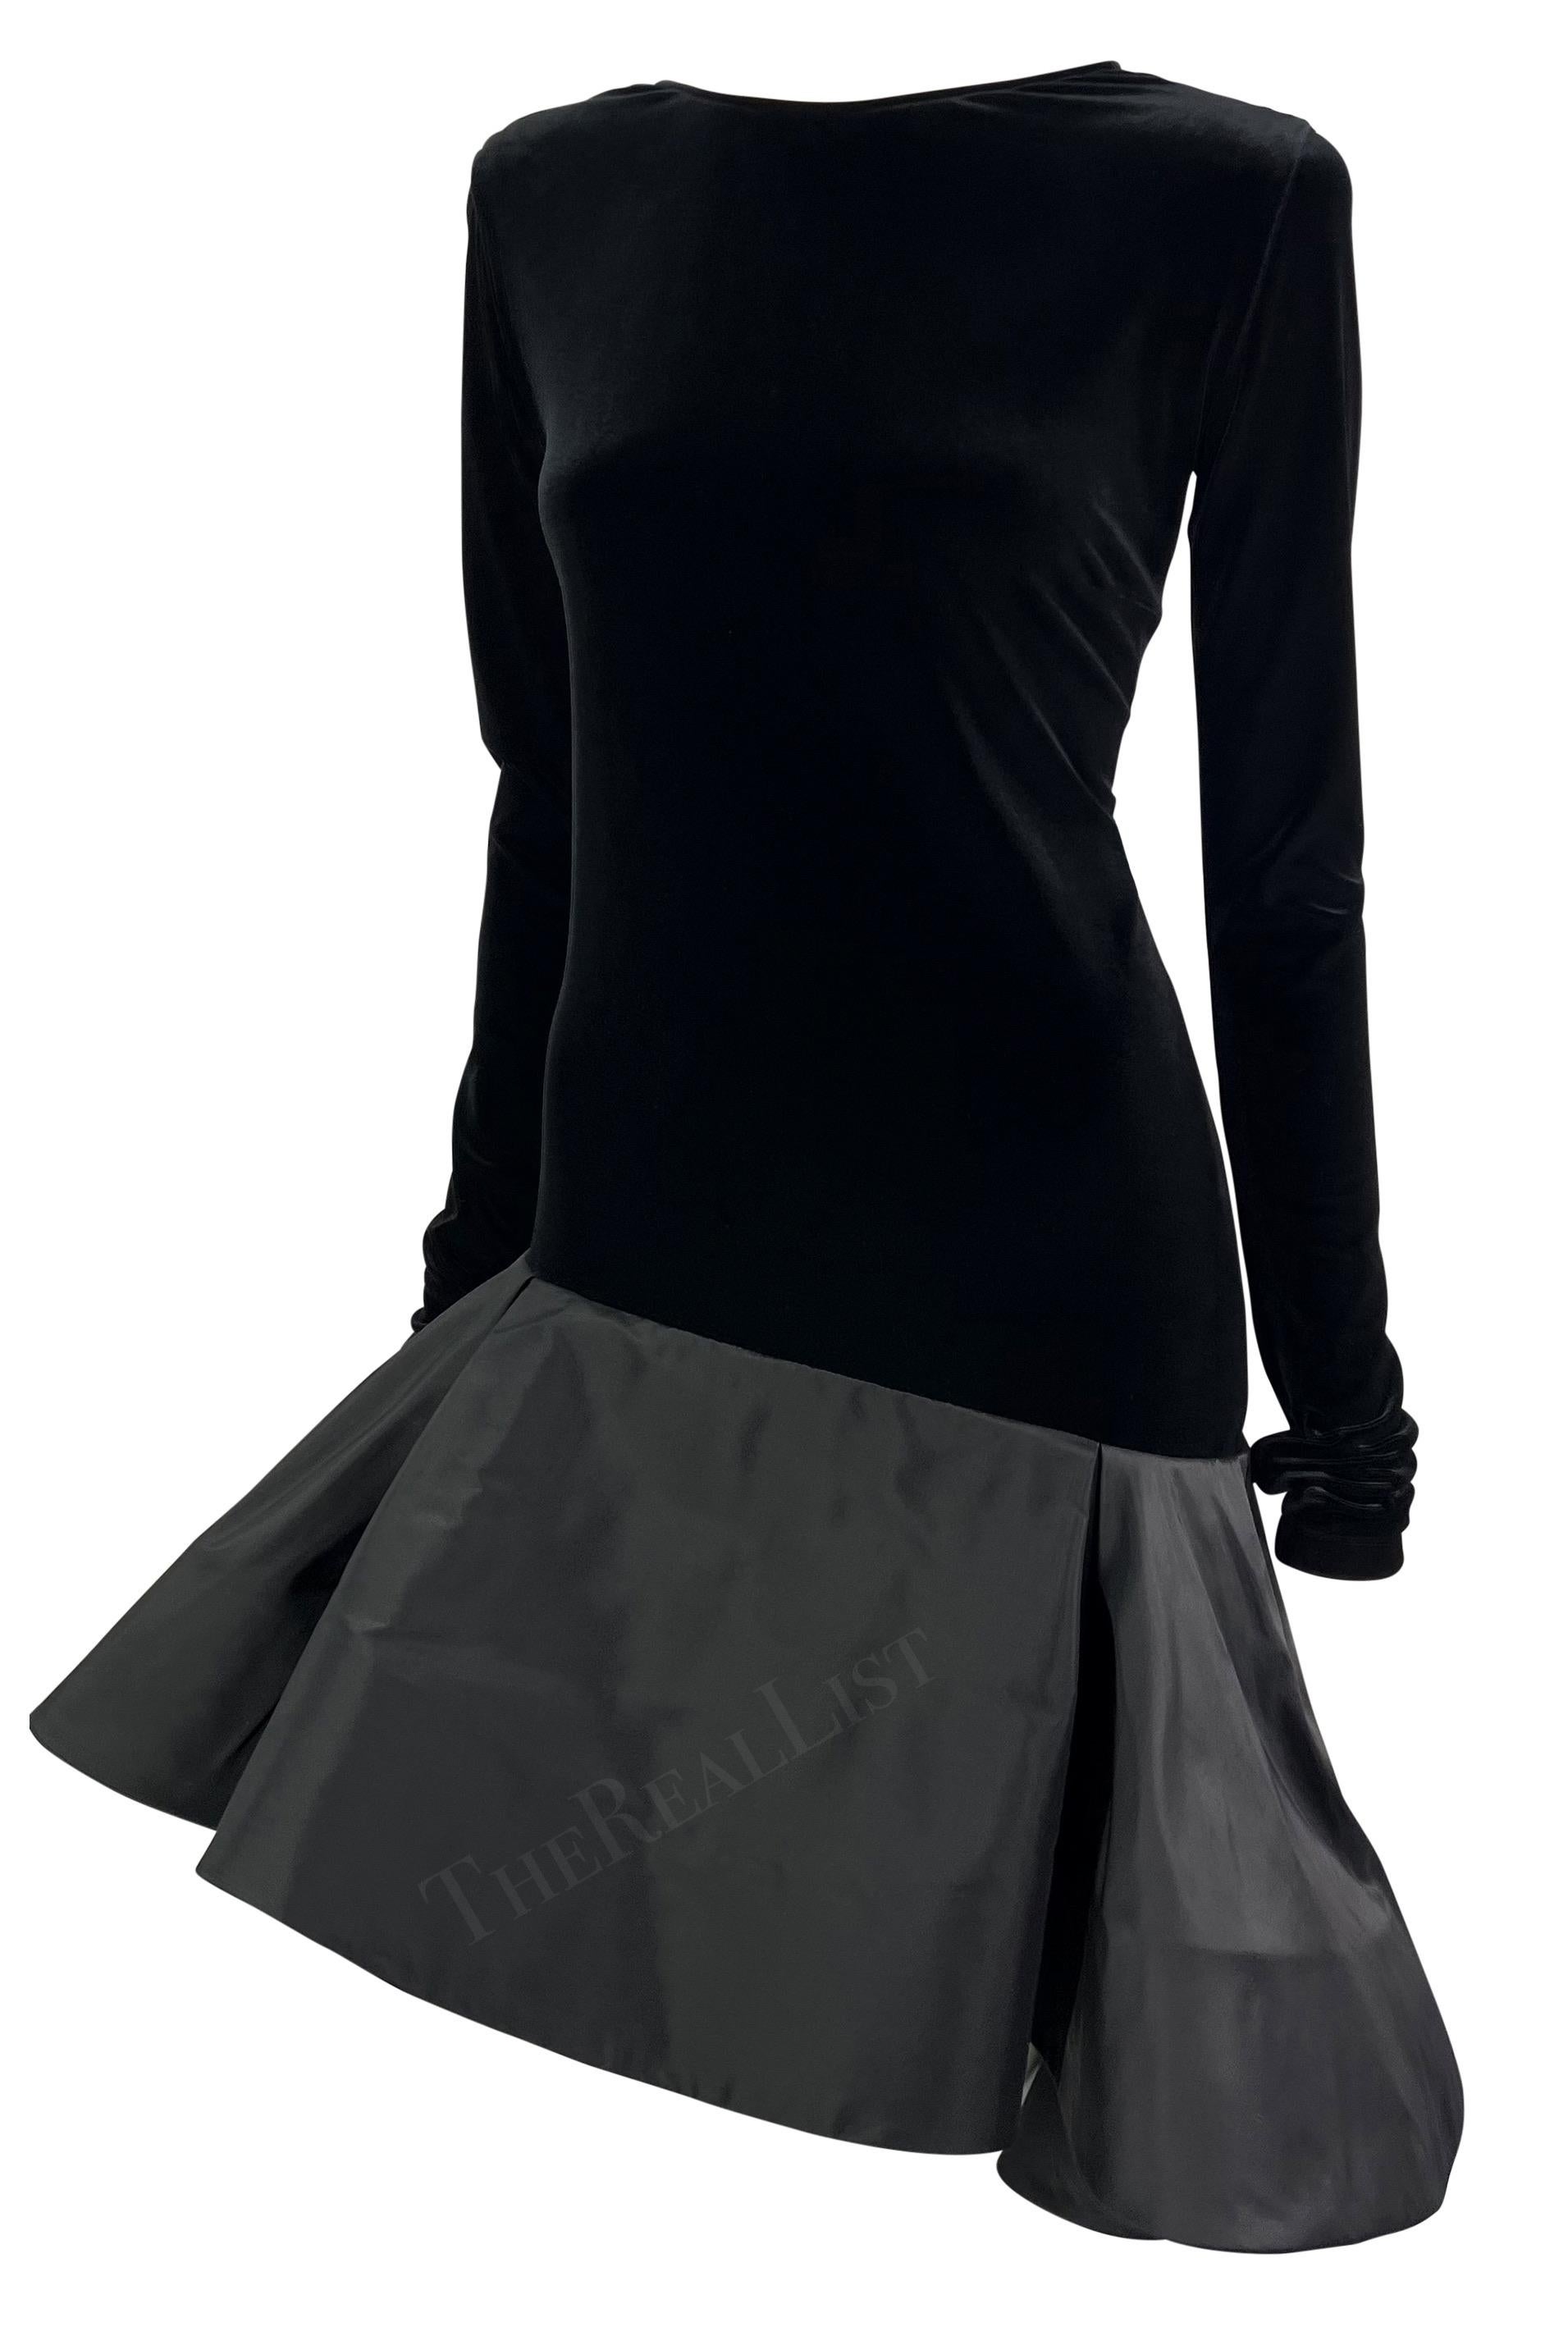 Presenting a fabulous black velvet Pierre Cardin haute couture flared dress. From the early 1990s, this fabulous long-sleeve dress features a black velvet top and is made complete with a voluminous flared skirt that asymmetrically connects to the